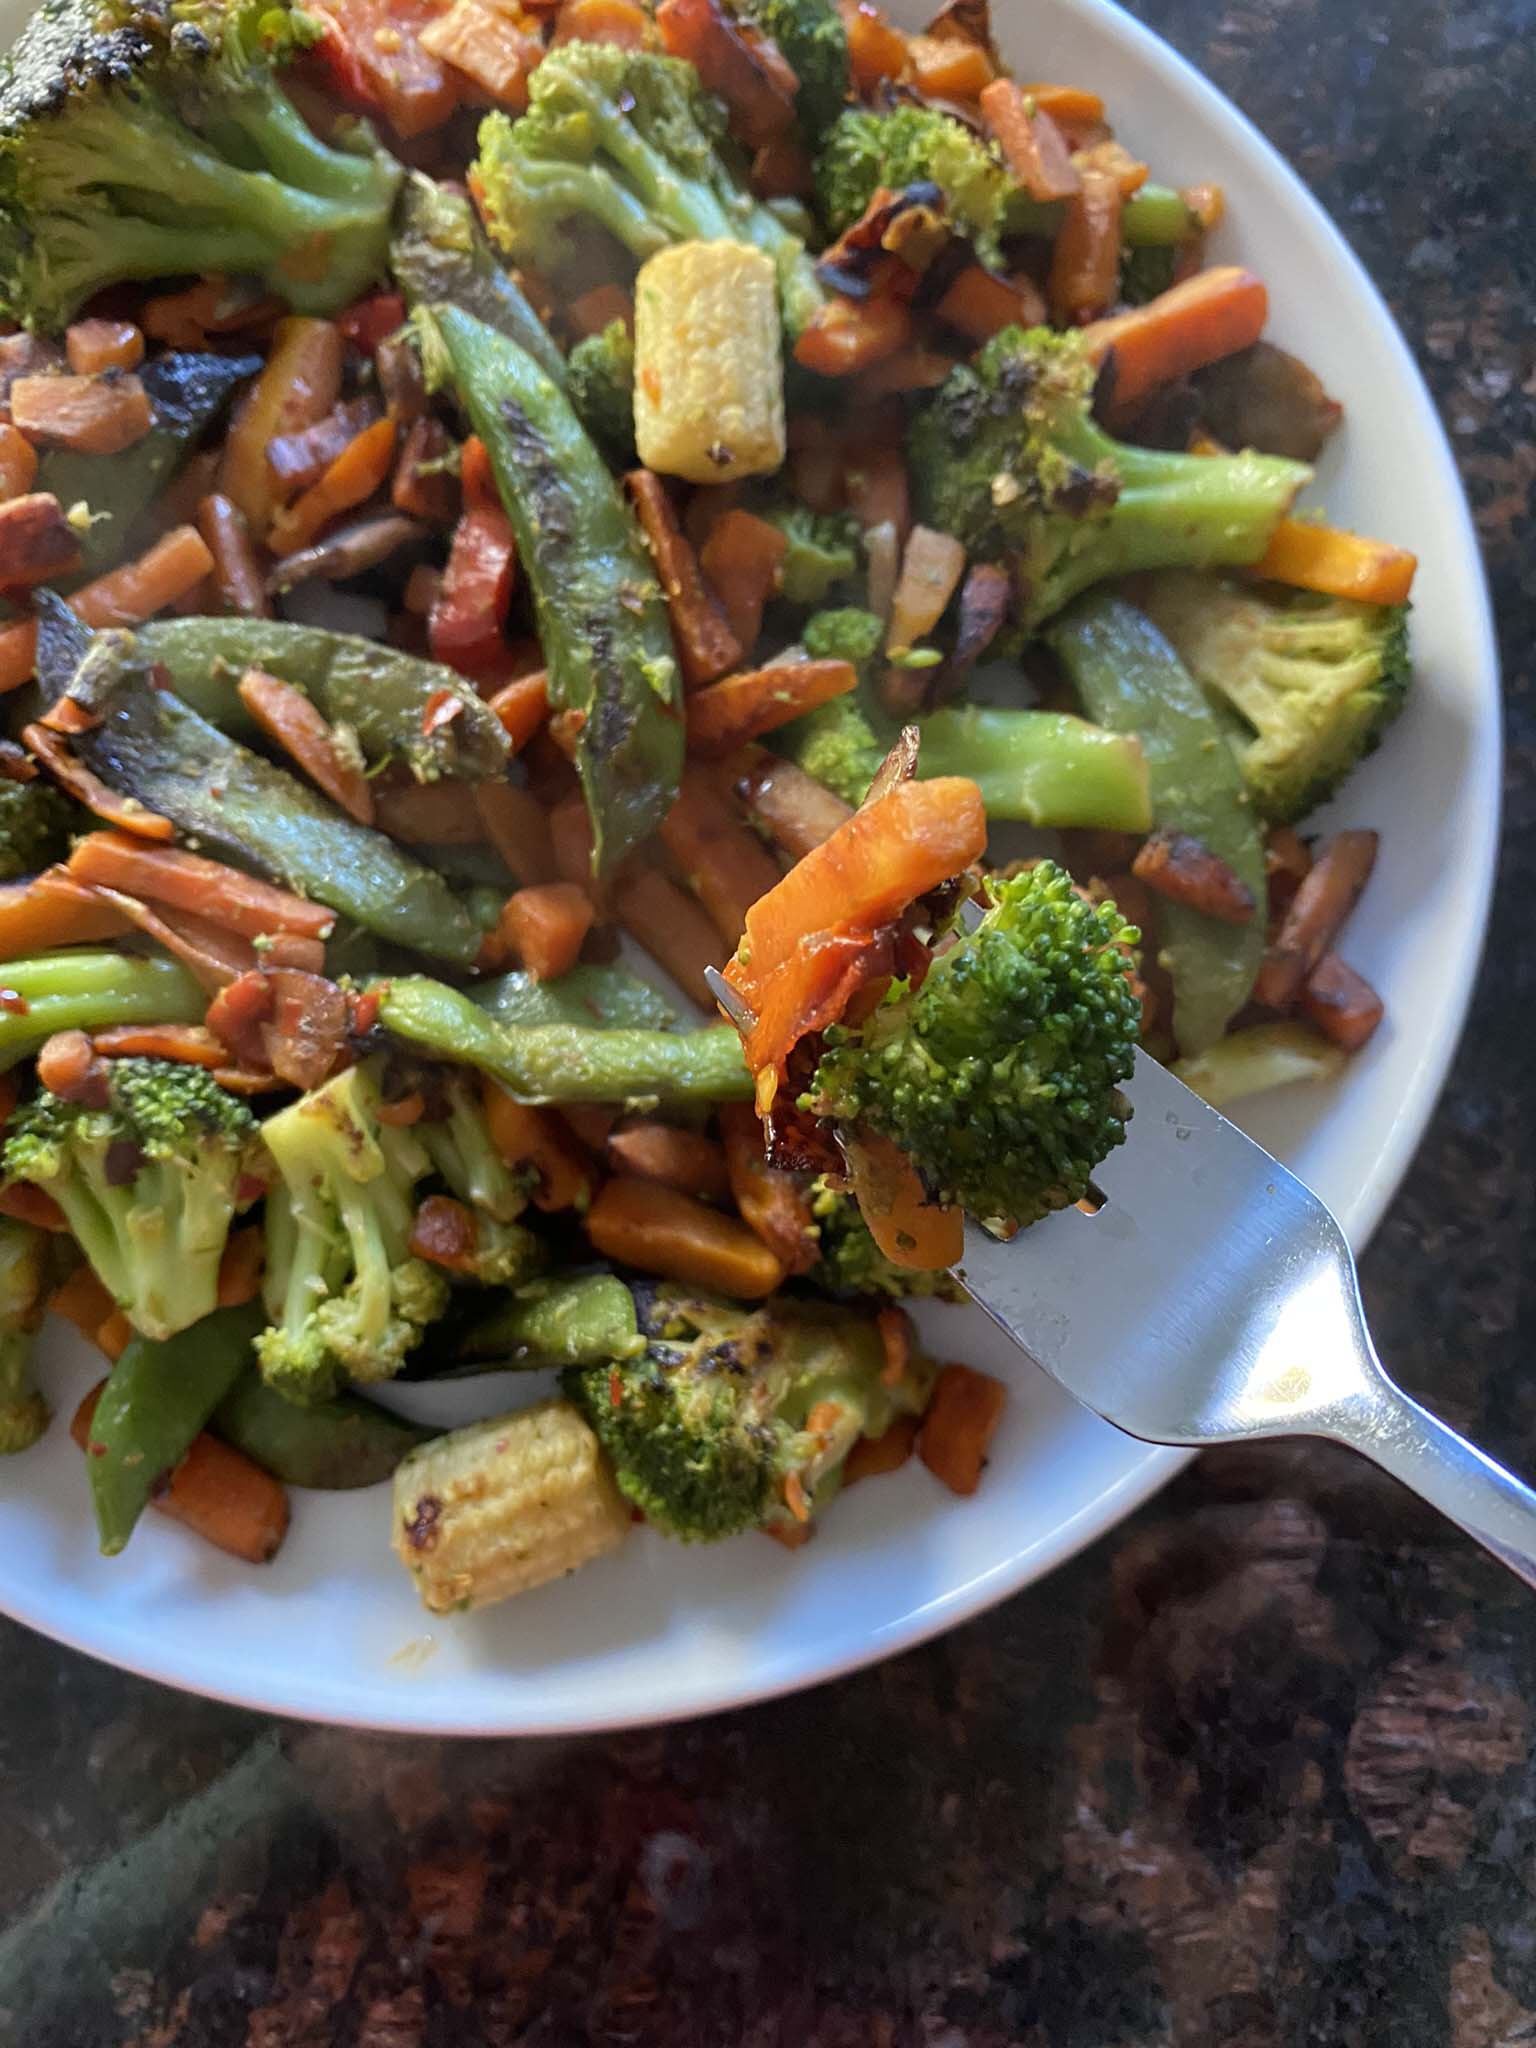 Sauteed vegetables on a plate.